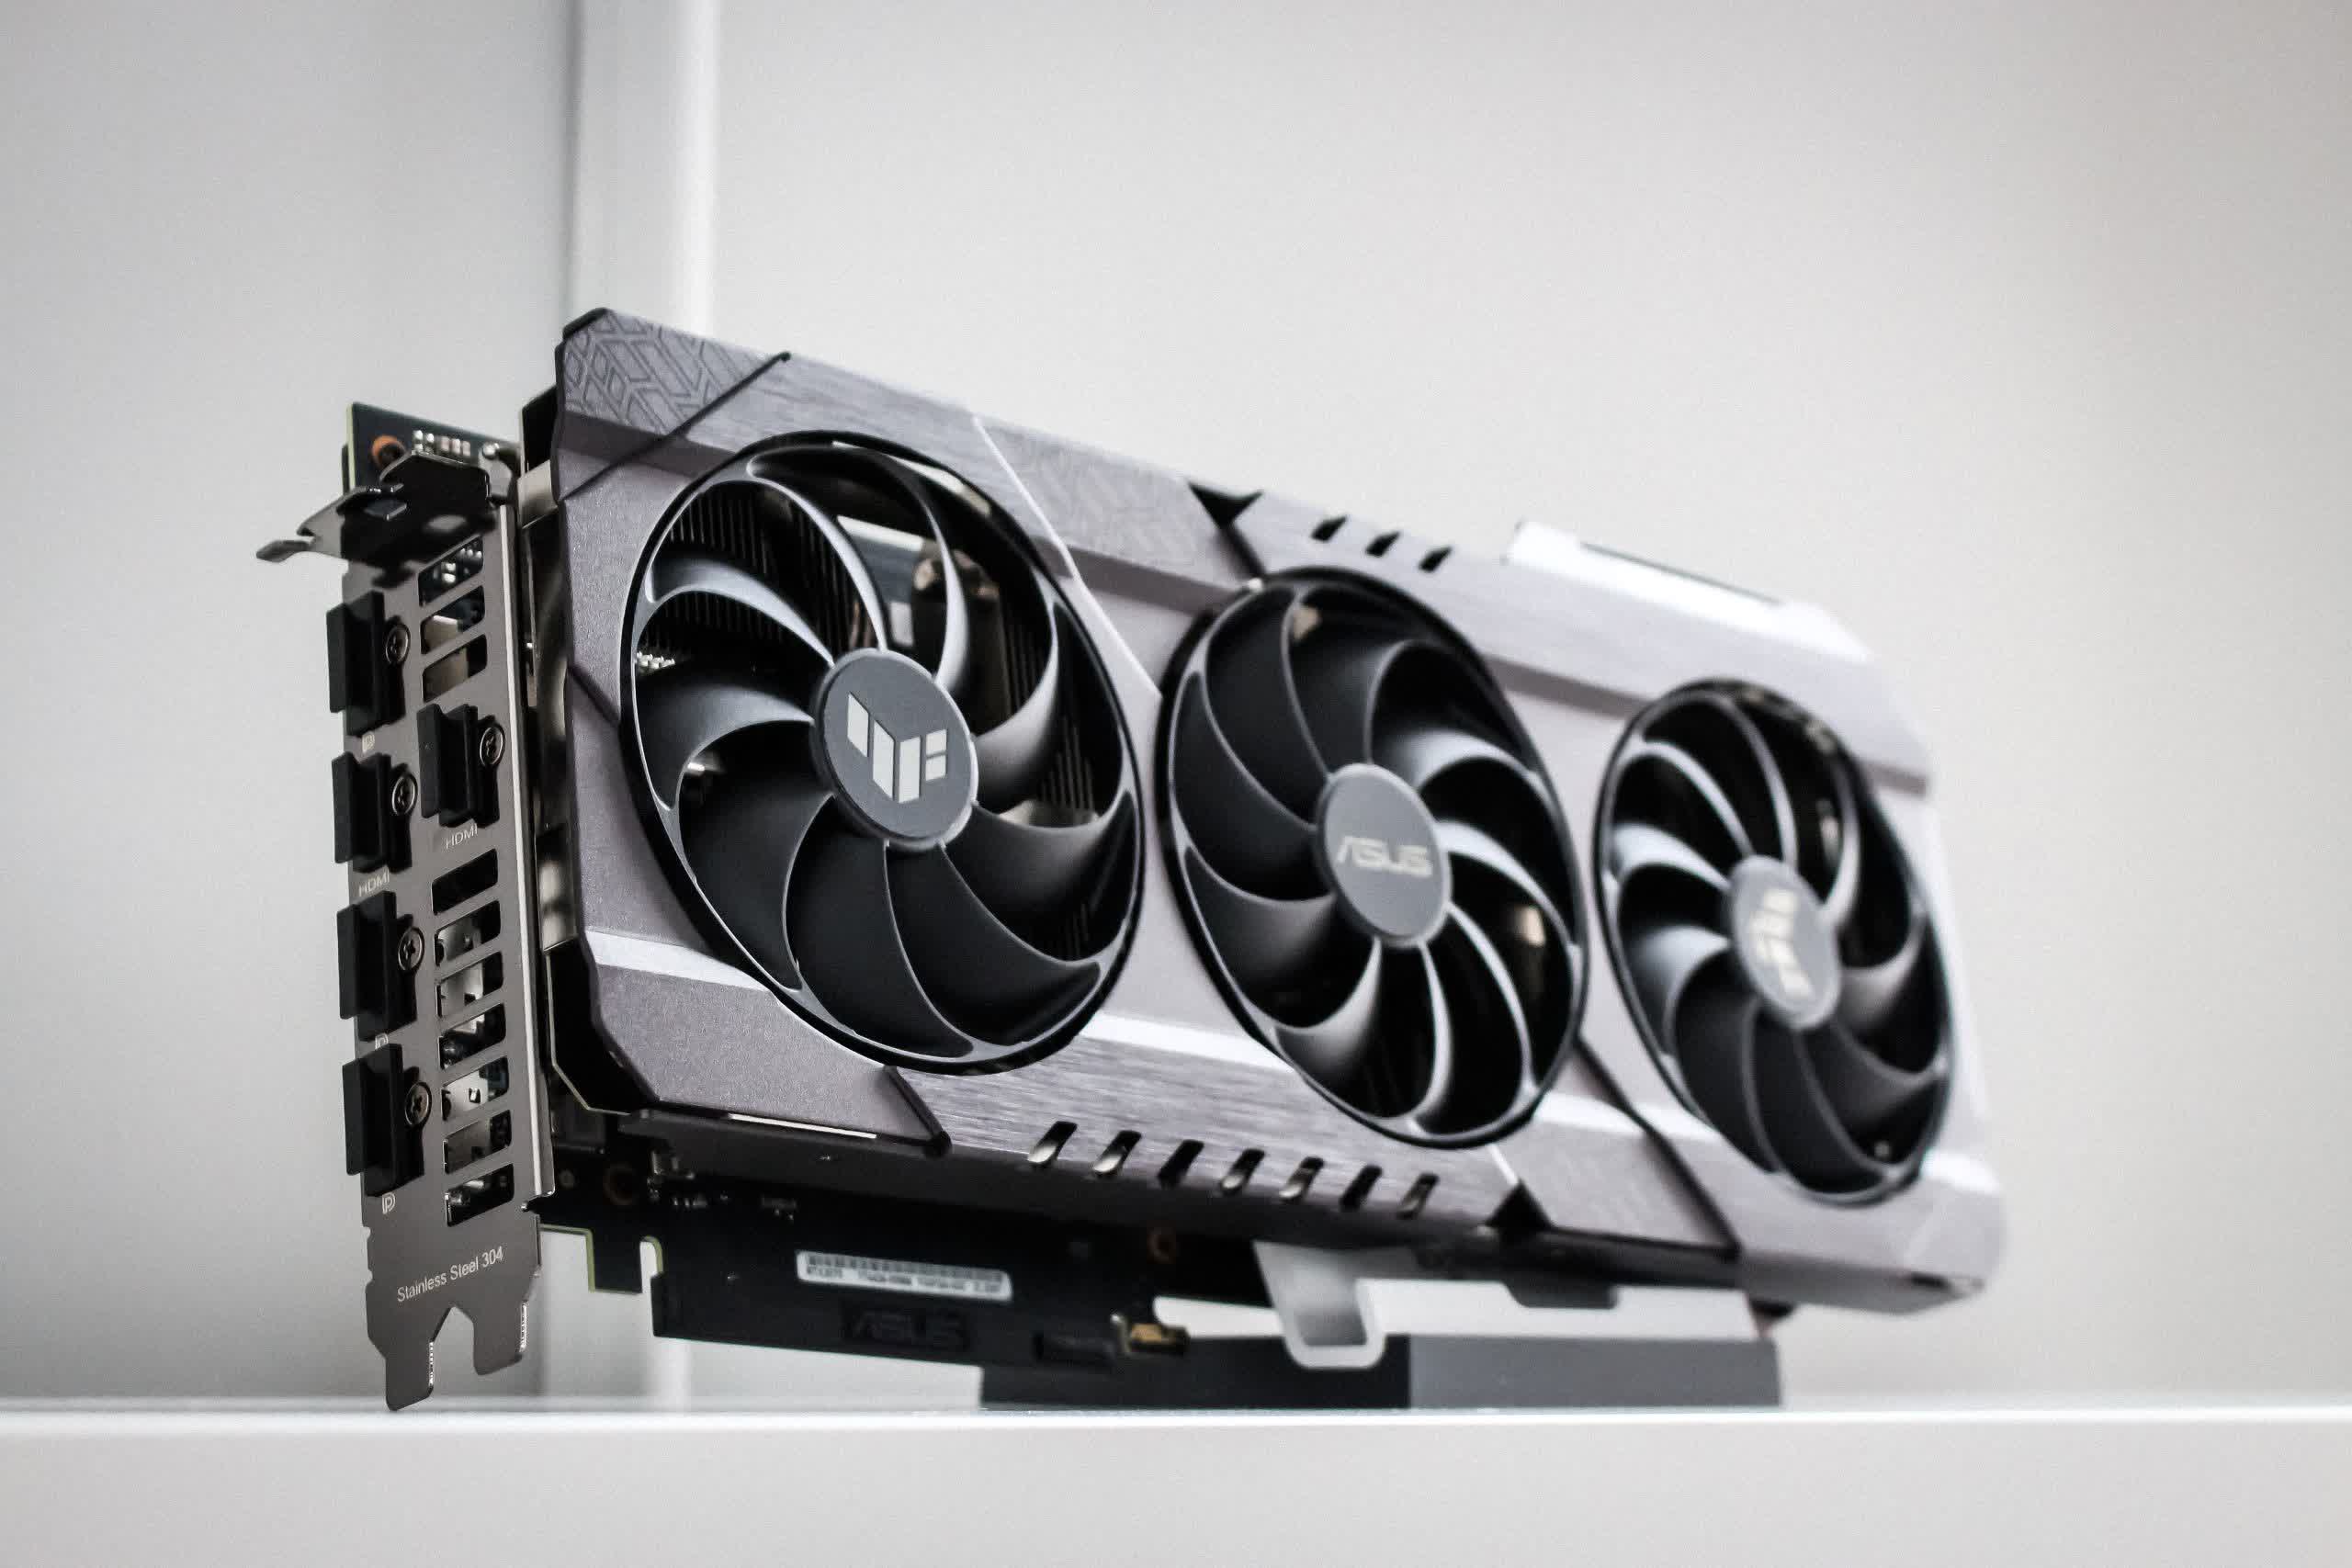 Nvidia is reportedly making 600W reference boards for the RTX 4090